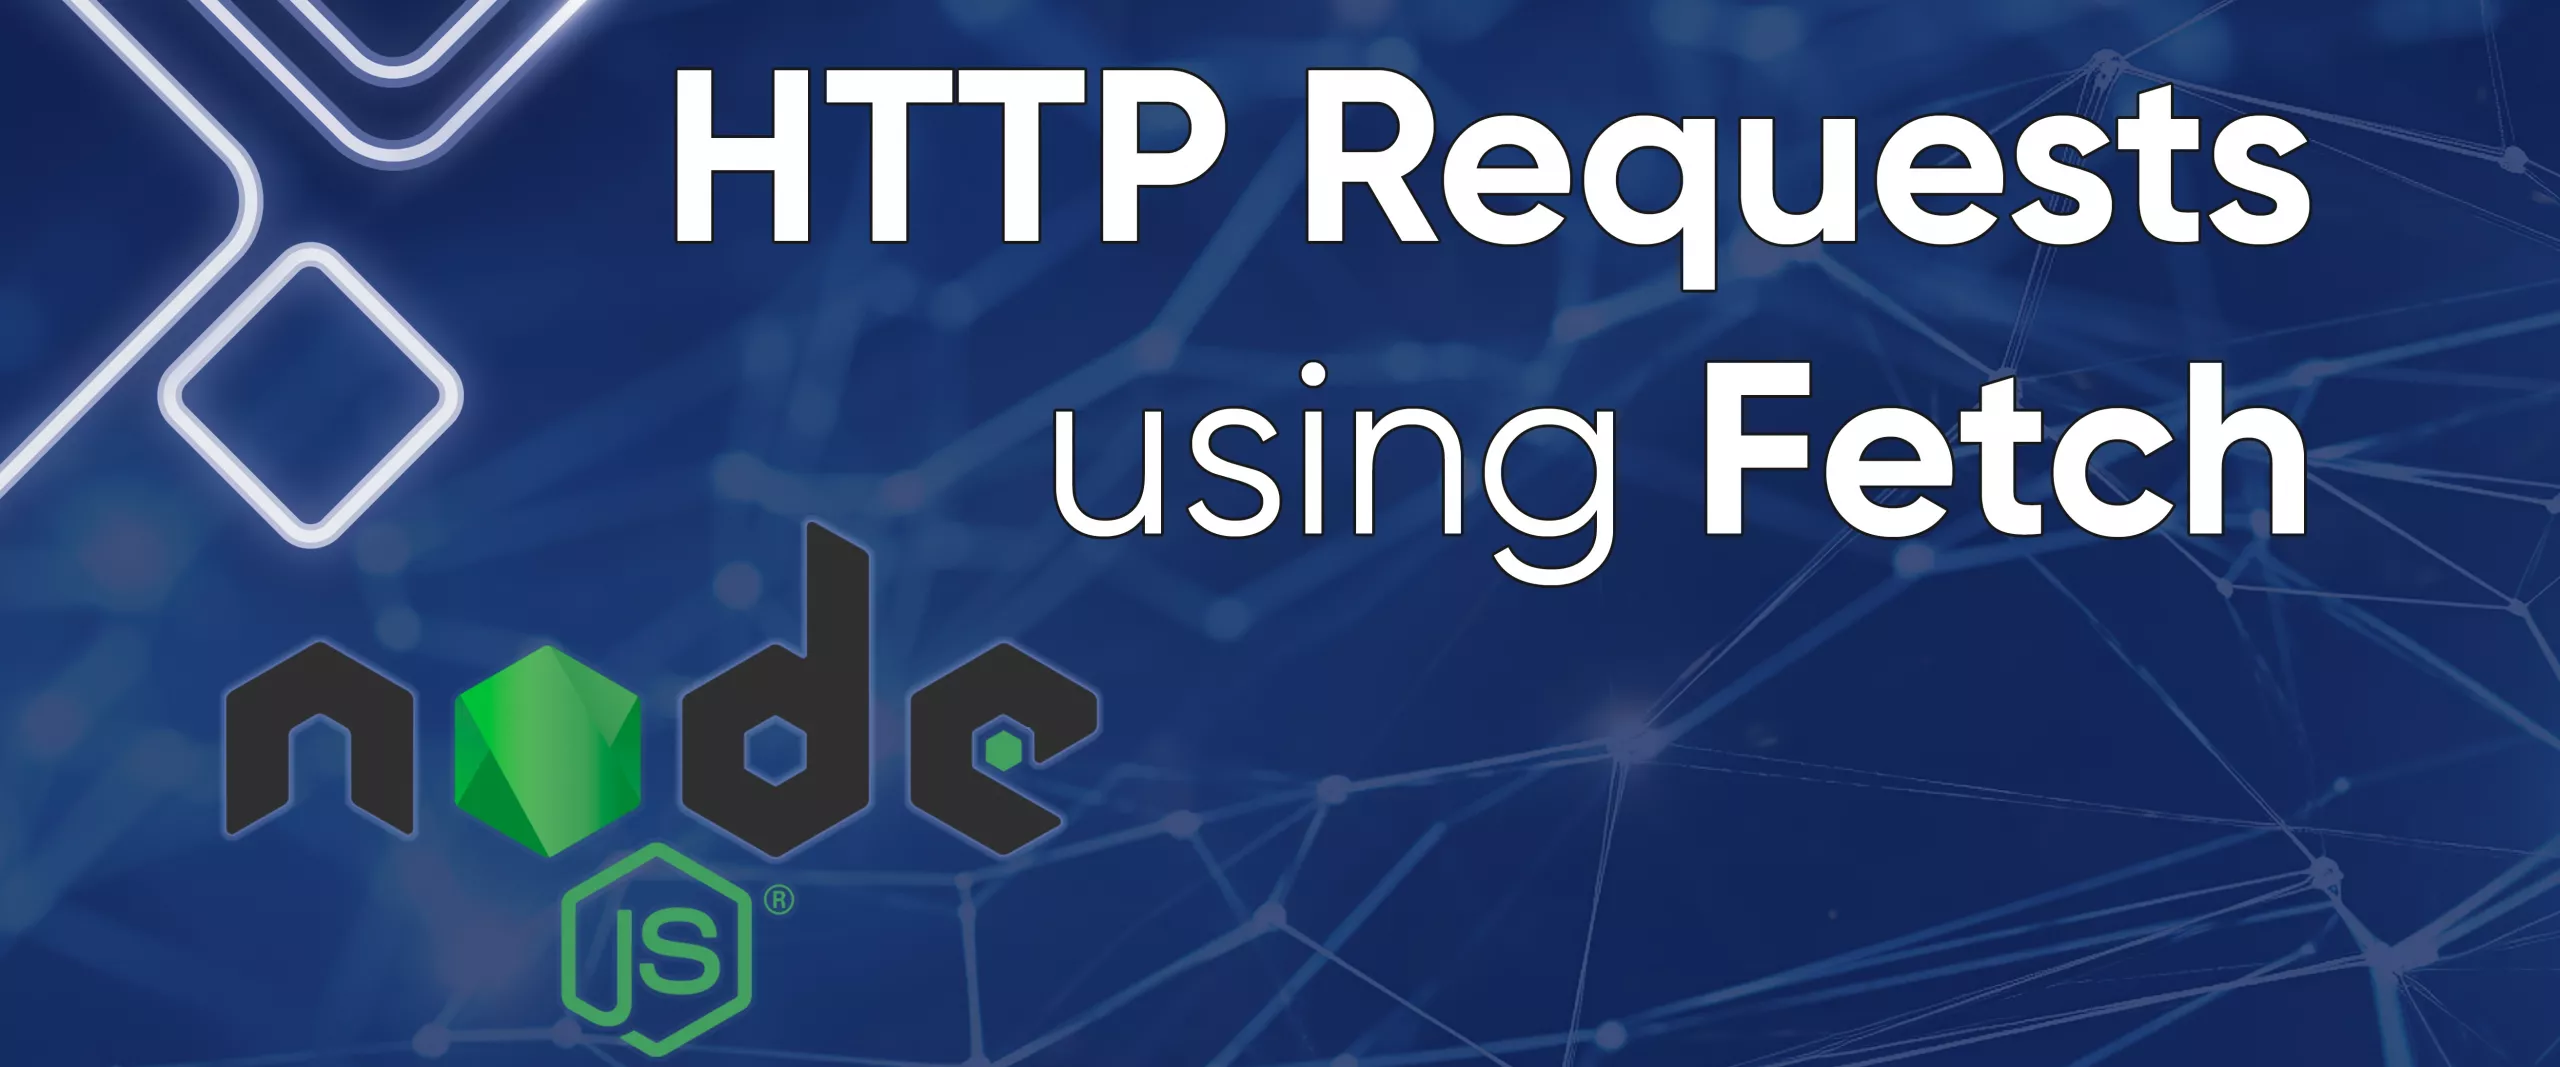 How to Make HTTP Requests in Node.js With Fetch